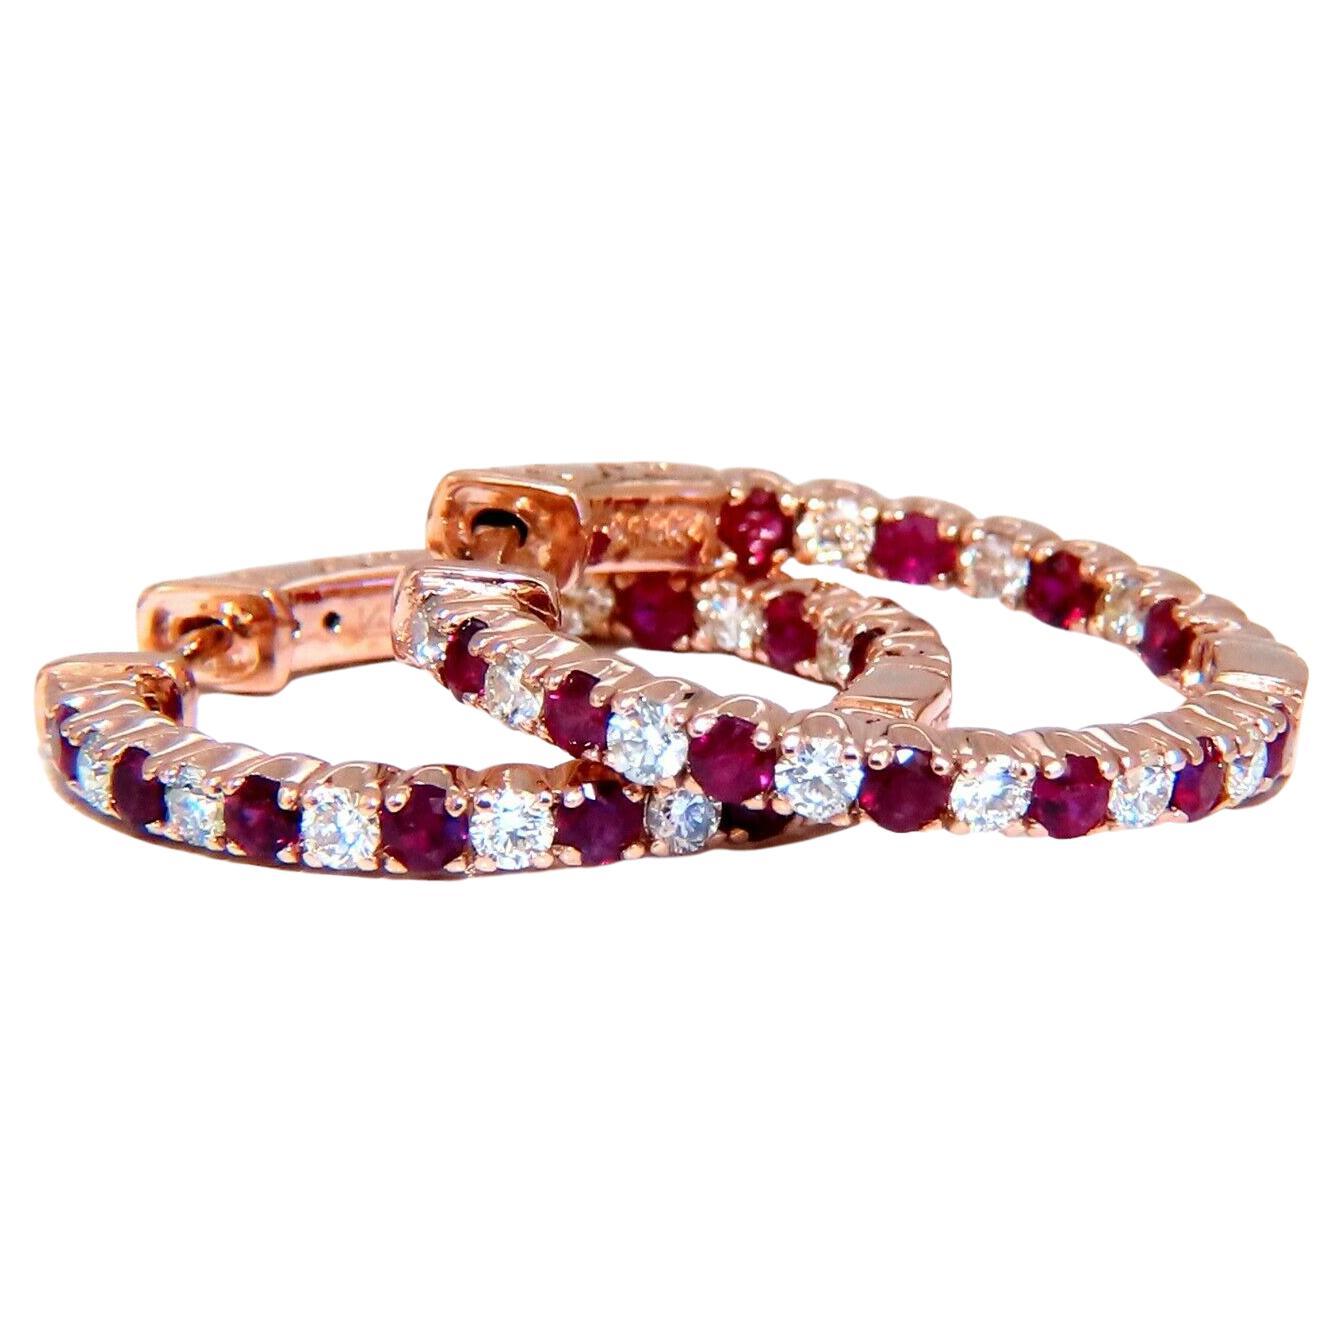 2.20ct Natural Ruby Diamonds Hoop Earrings 14kt Rose Gold Inside Out